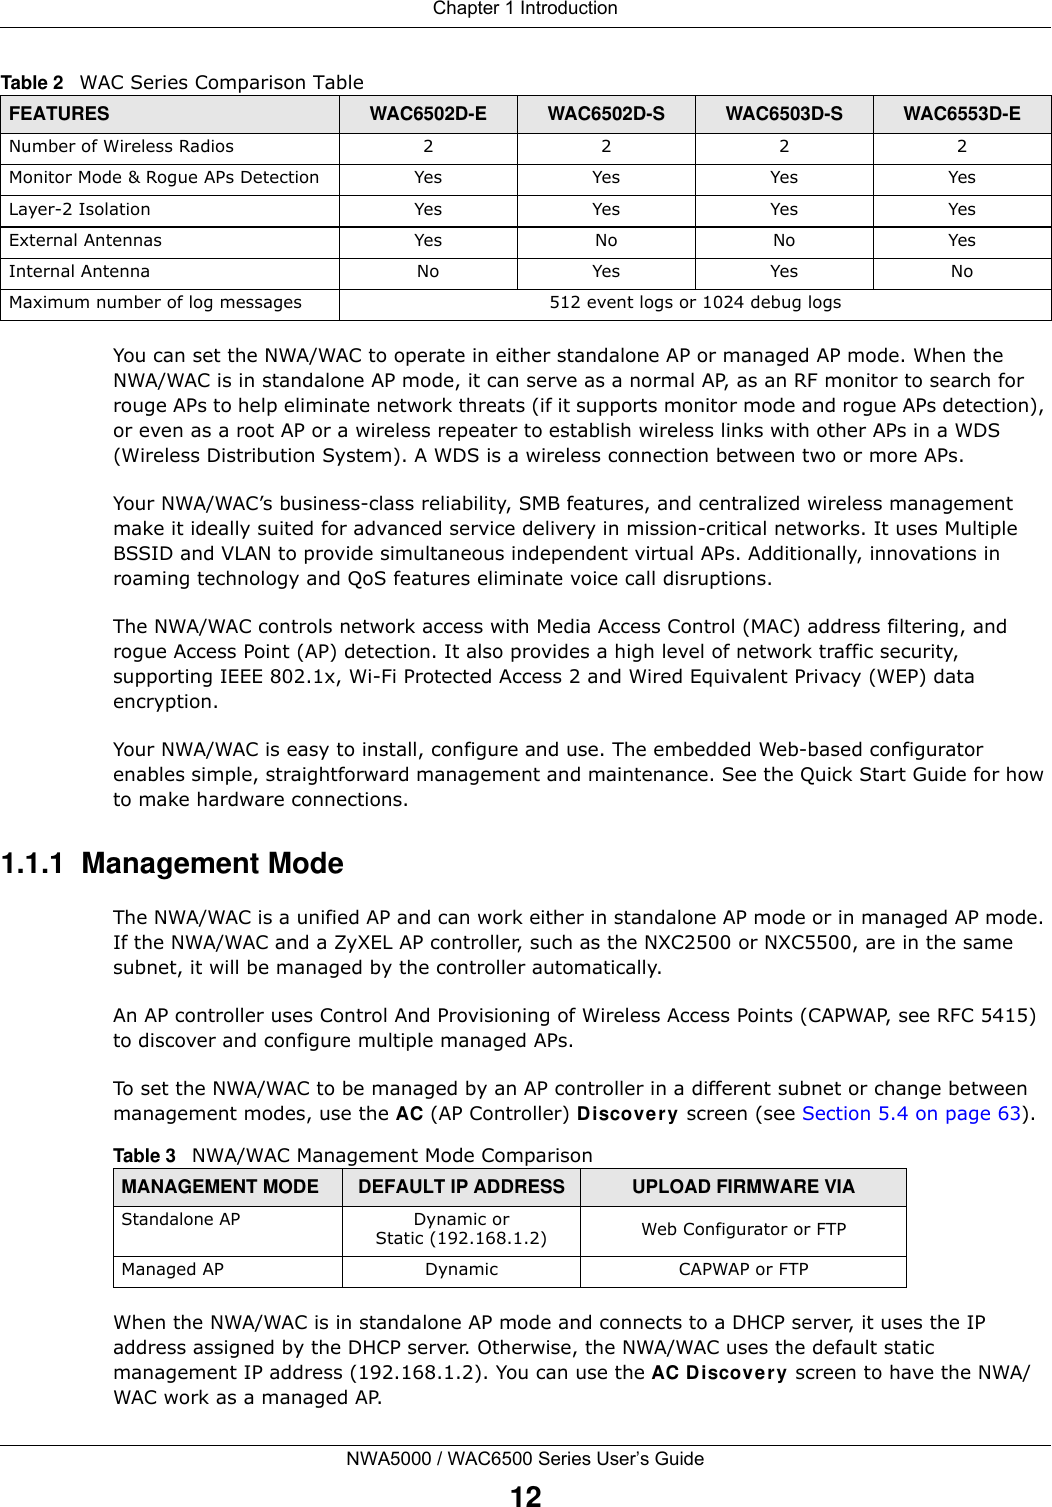 Chapter 1 IntroductionNWA5000 / WAC6500 Series User’s Guide12You can set the NWA/WAC to operate in either standalone AP or managed AP mode. When the NWA/WAC is in standalone AP mode, it can serve as a normal AP, as an RF monitor to search for rouge APs to help eliminate network threats (if it supports monitor mode and rogue APs detection), or even as a root AP or a wireless repeater to establish wireless links with other APs in a WDS (Wireless Distribution System). A WDS is a wireless connection between two or more APs.Your NWA/WAC’s business-class reliability, SMB features, and centralized wireless management make it ideally suited for advanced service delivery in mission-critical networks. It uses Multiple BSSID and VLAN to provide simultaneous independent virtual APs. Additionally, innovations in roaming technology and QoS features eliminate voice call disruptions. The NWA/WAC controls network access with Media Access Control (MAC) address filtering, and rogue Access Point (AP) detection. It also provides a high level of network traffic security, supporting IEEE 802.1x, Wi-Fi Protected Access 2 and Wired Equivalent Privacy (WEP) data encryption.Your NWA/WAC is easy to install, configure and use. The embedded Web-based configurator enables simple, straightforward management and maintenance. See the Quick Start Guide for how to make hardware connections.1.1.1  Management Mode The NWA/WAC is a unified AP and can work either in standalone AP mode or in managed AP mode. If the NWA/WAC and a ZyXEL AP controller, such as the NXC2500 or NXC5500, are in the same subnet, it will be managed by the controller automatically.An AP controller uses Control And Provisioning of Wireless Access Points (CAPWAP, see RFC 5415) to discover and configure multiple managed APs.To set the NWA/WAC to be managed by an AP controller in a different subnet or change between management modes, use the AC (AP Controller) D iscovery screen (see Section 5.4 on page 63). When the NWA/WAC is in standalone AP mode and connects to a DHCP server, it uses the IP address assigned by the DHCP server. Otherwise, the NWA/WAC uses the default static management IP address (192.168.1.2). You can use the AC Discover y screen to have the NWA/WAC work as a managed AP.Number of Wireless Radios 2 2 2 2Monitor Mode &amp; Rogue APs Detection Yes Yes Yes YesLayer-2 Isolation Yes Yes Yes YesExternal Antennas Yes No No YesInternal Antenna No Yes Yes NoMaximum number of log messages  512 event logs or 1024 debug logsTable 2   WAC Series Comparison TableFEATURES WAC6502D-E WAC6502D-S WAC6503D-S WAC6553D-ETable 3   NWA/WAC Management Mode ComparisonMANAGEMENT MODE DEFAULT IP ADDRESS UPLOAD FIRMWARE VIAStandalone APDynamic orStatic (192.168.1.2) Web Configurator or FTPManaged AP Dynamic CAPWAP or FTP